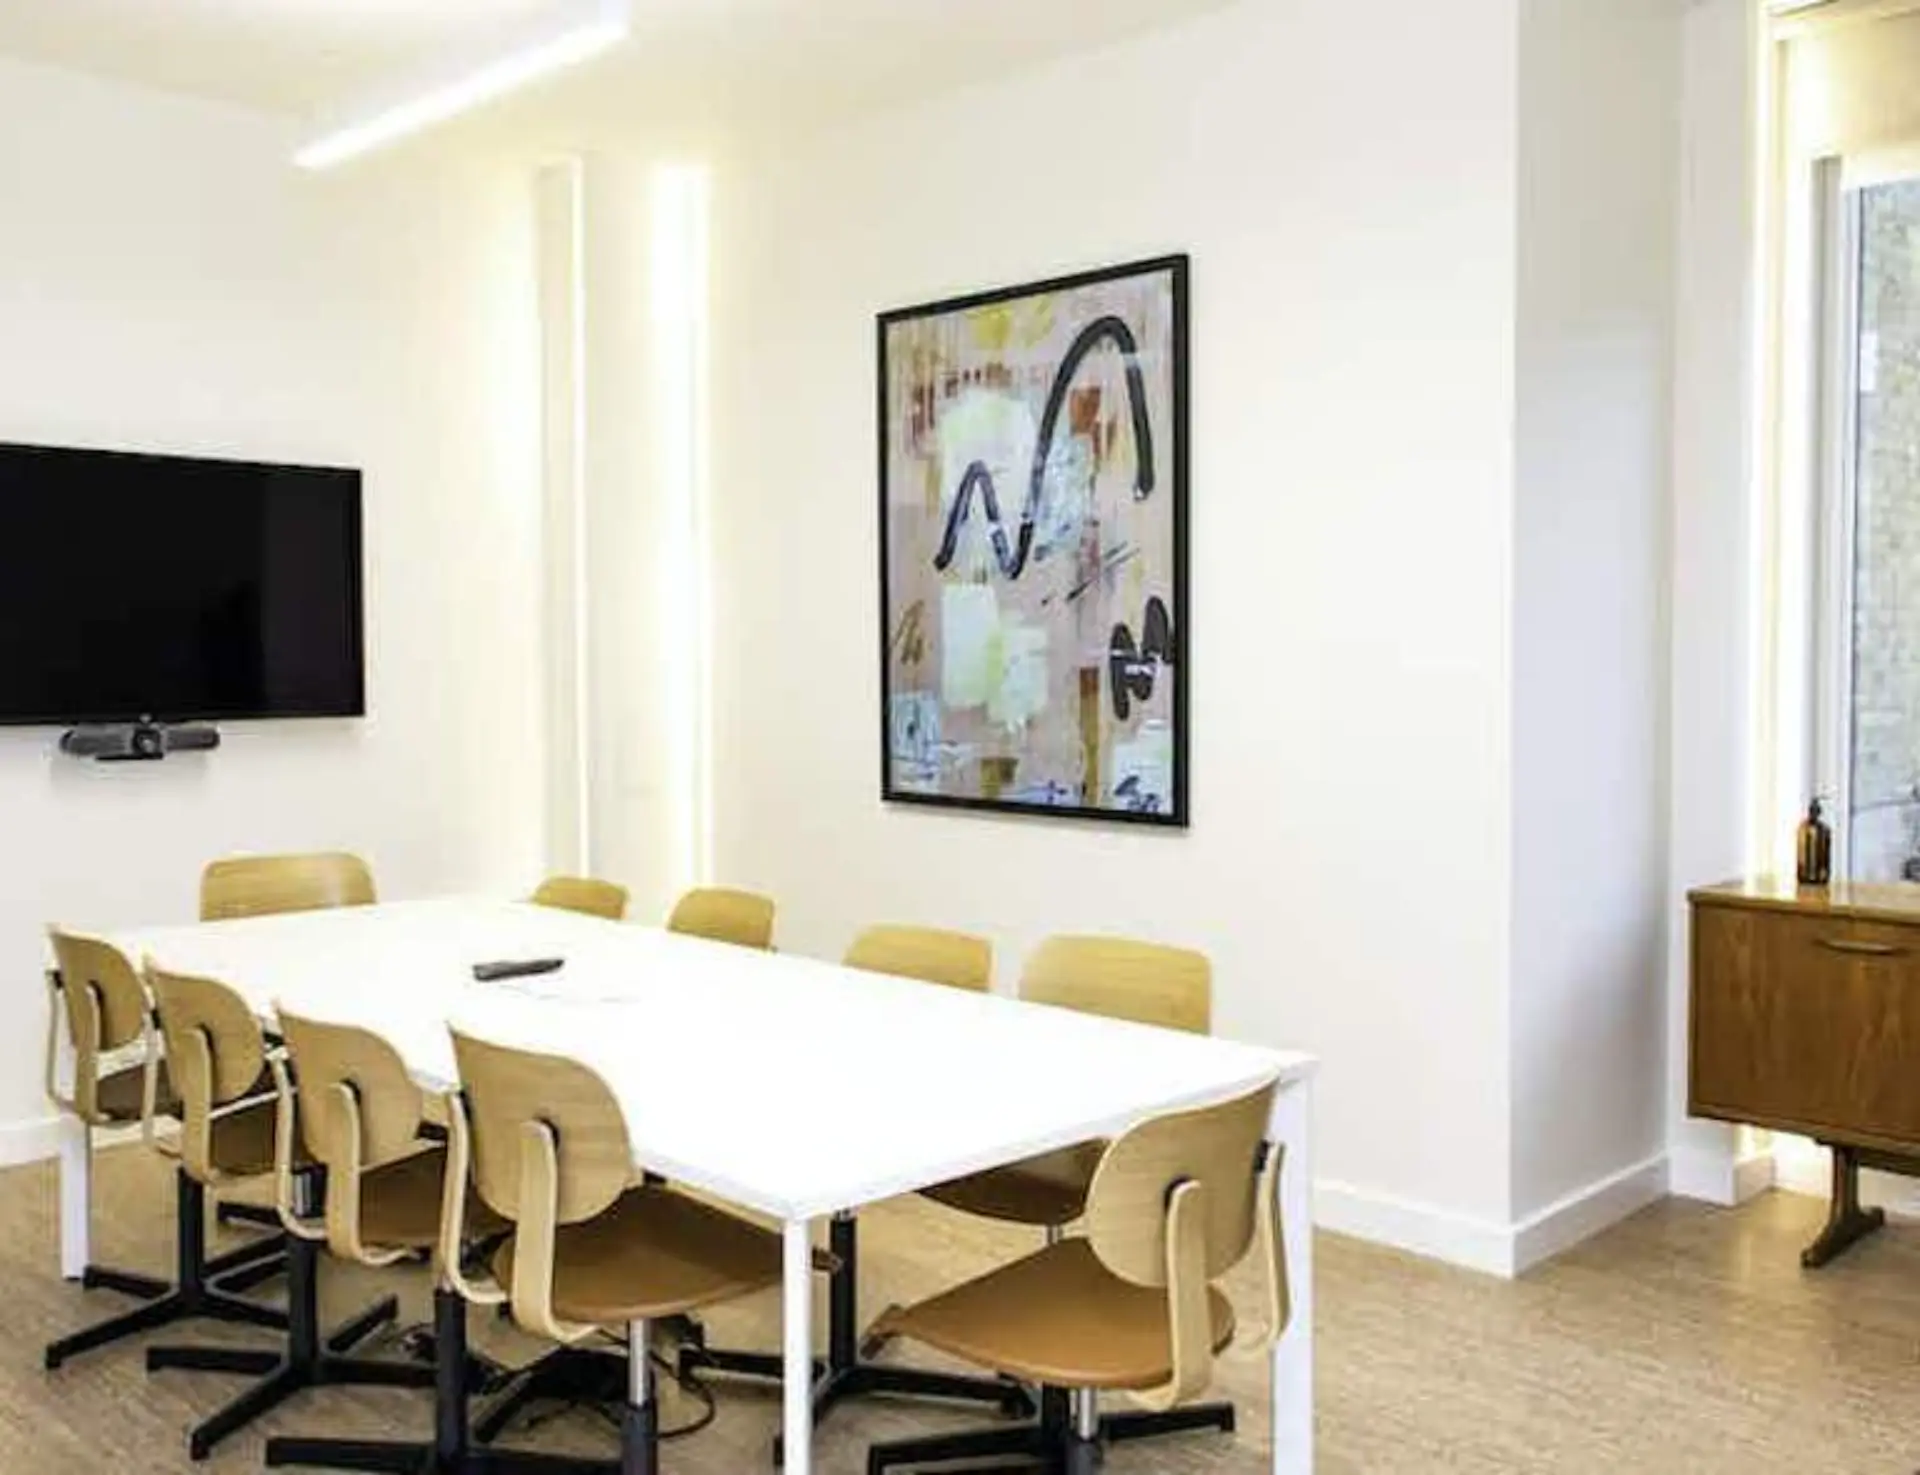 X+Why meeting room venue hire spacious light boardroom conference room presentations